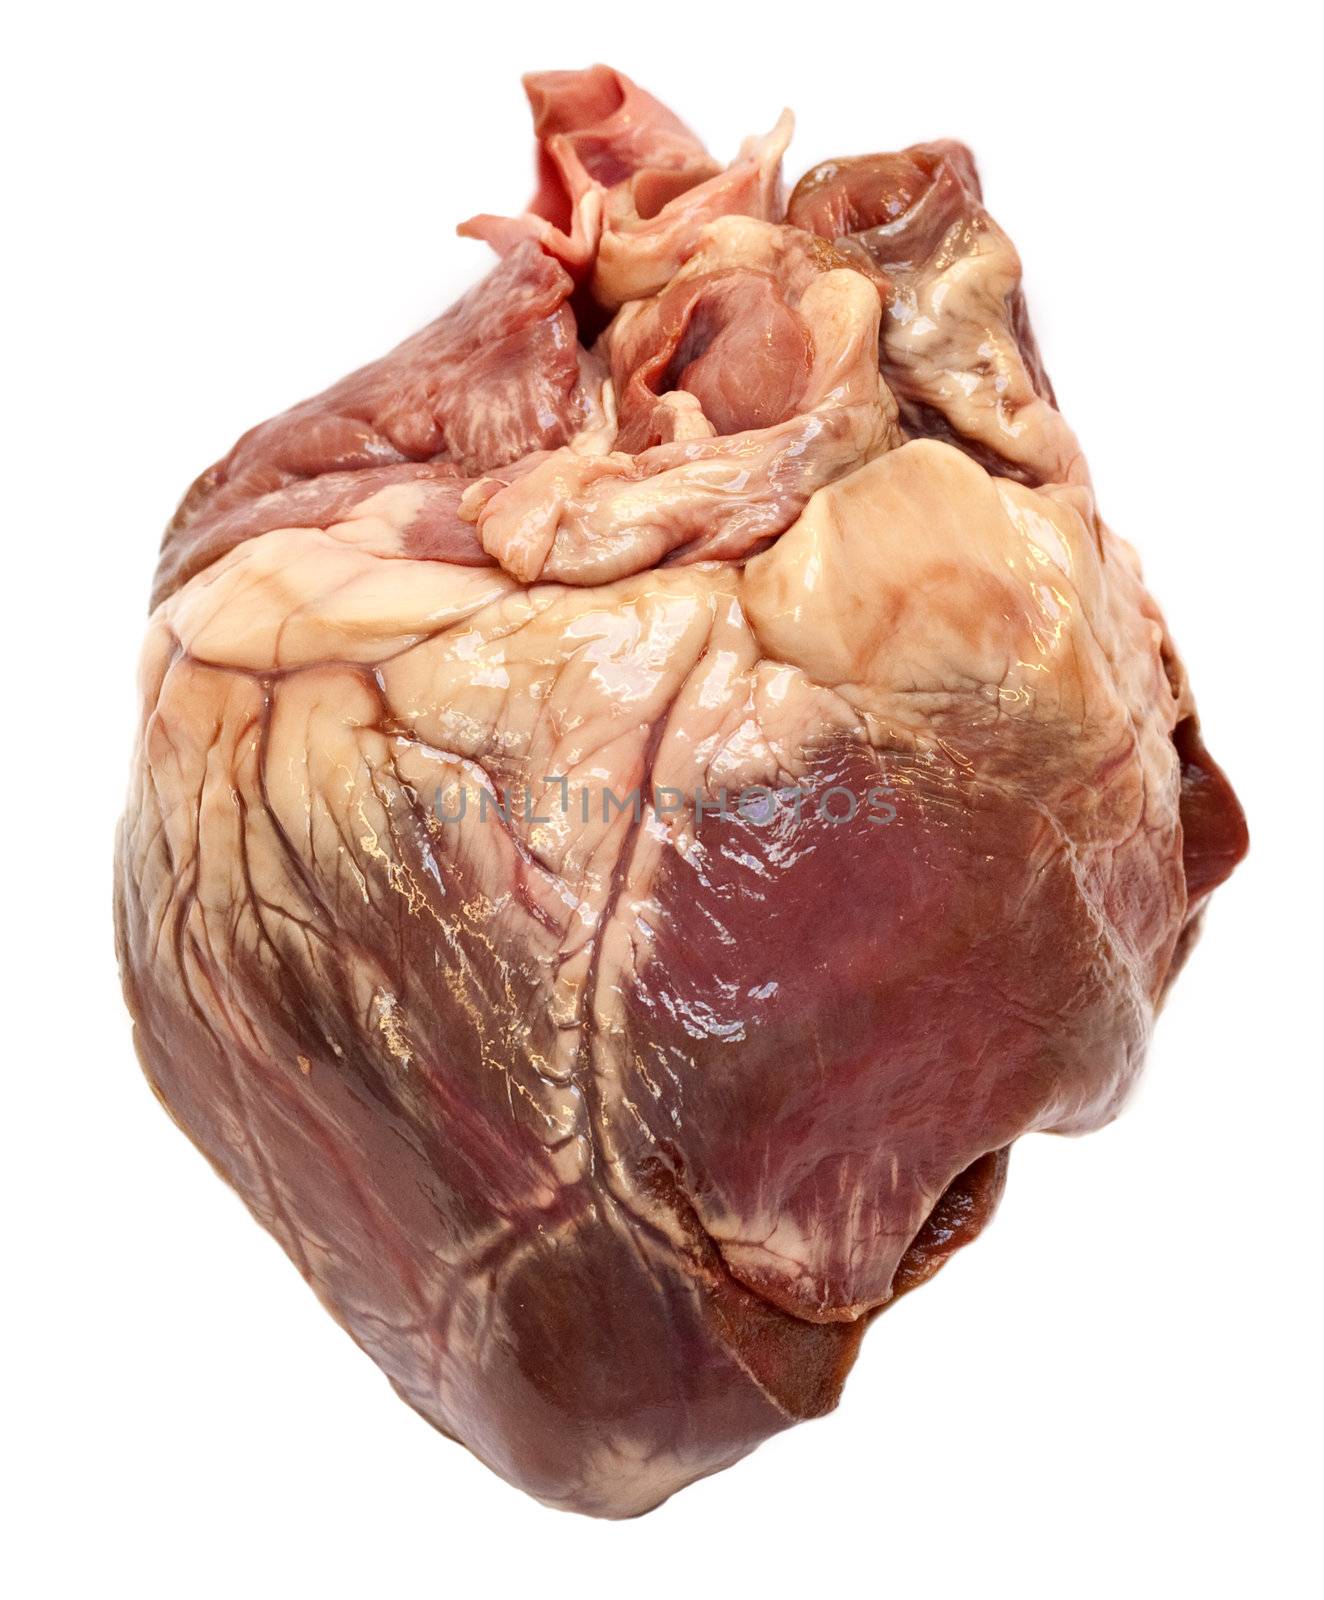 Genuine swine heart isolated on white background. Very similar to human heart.